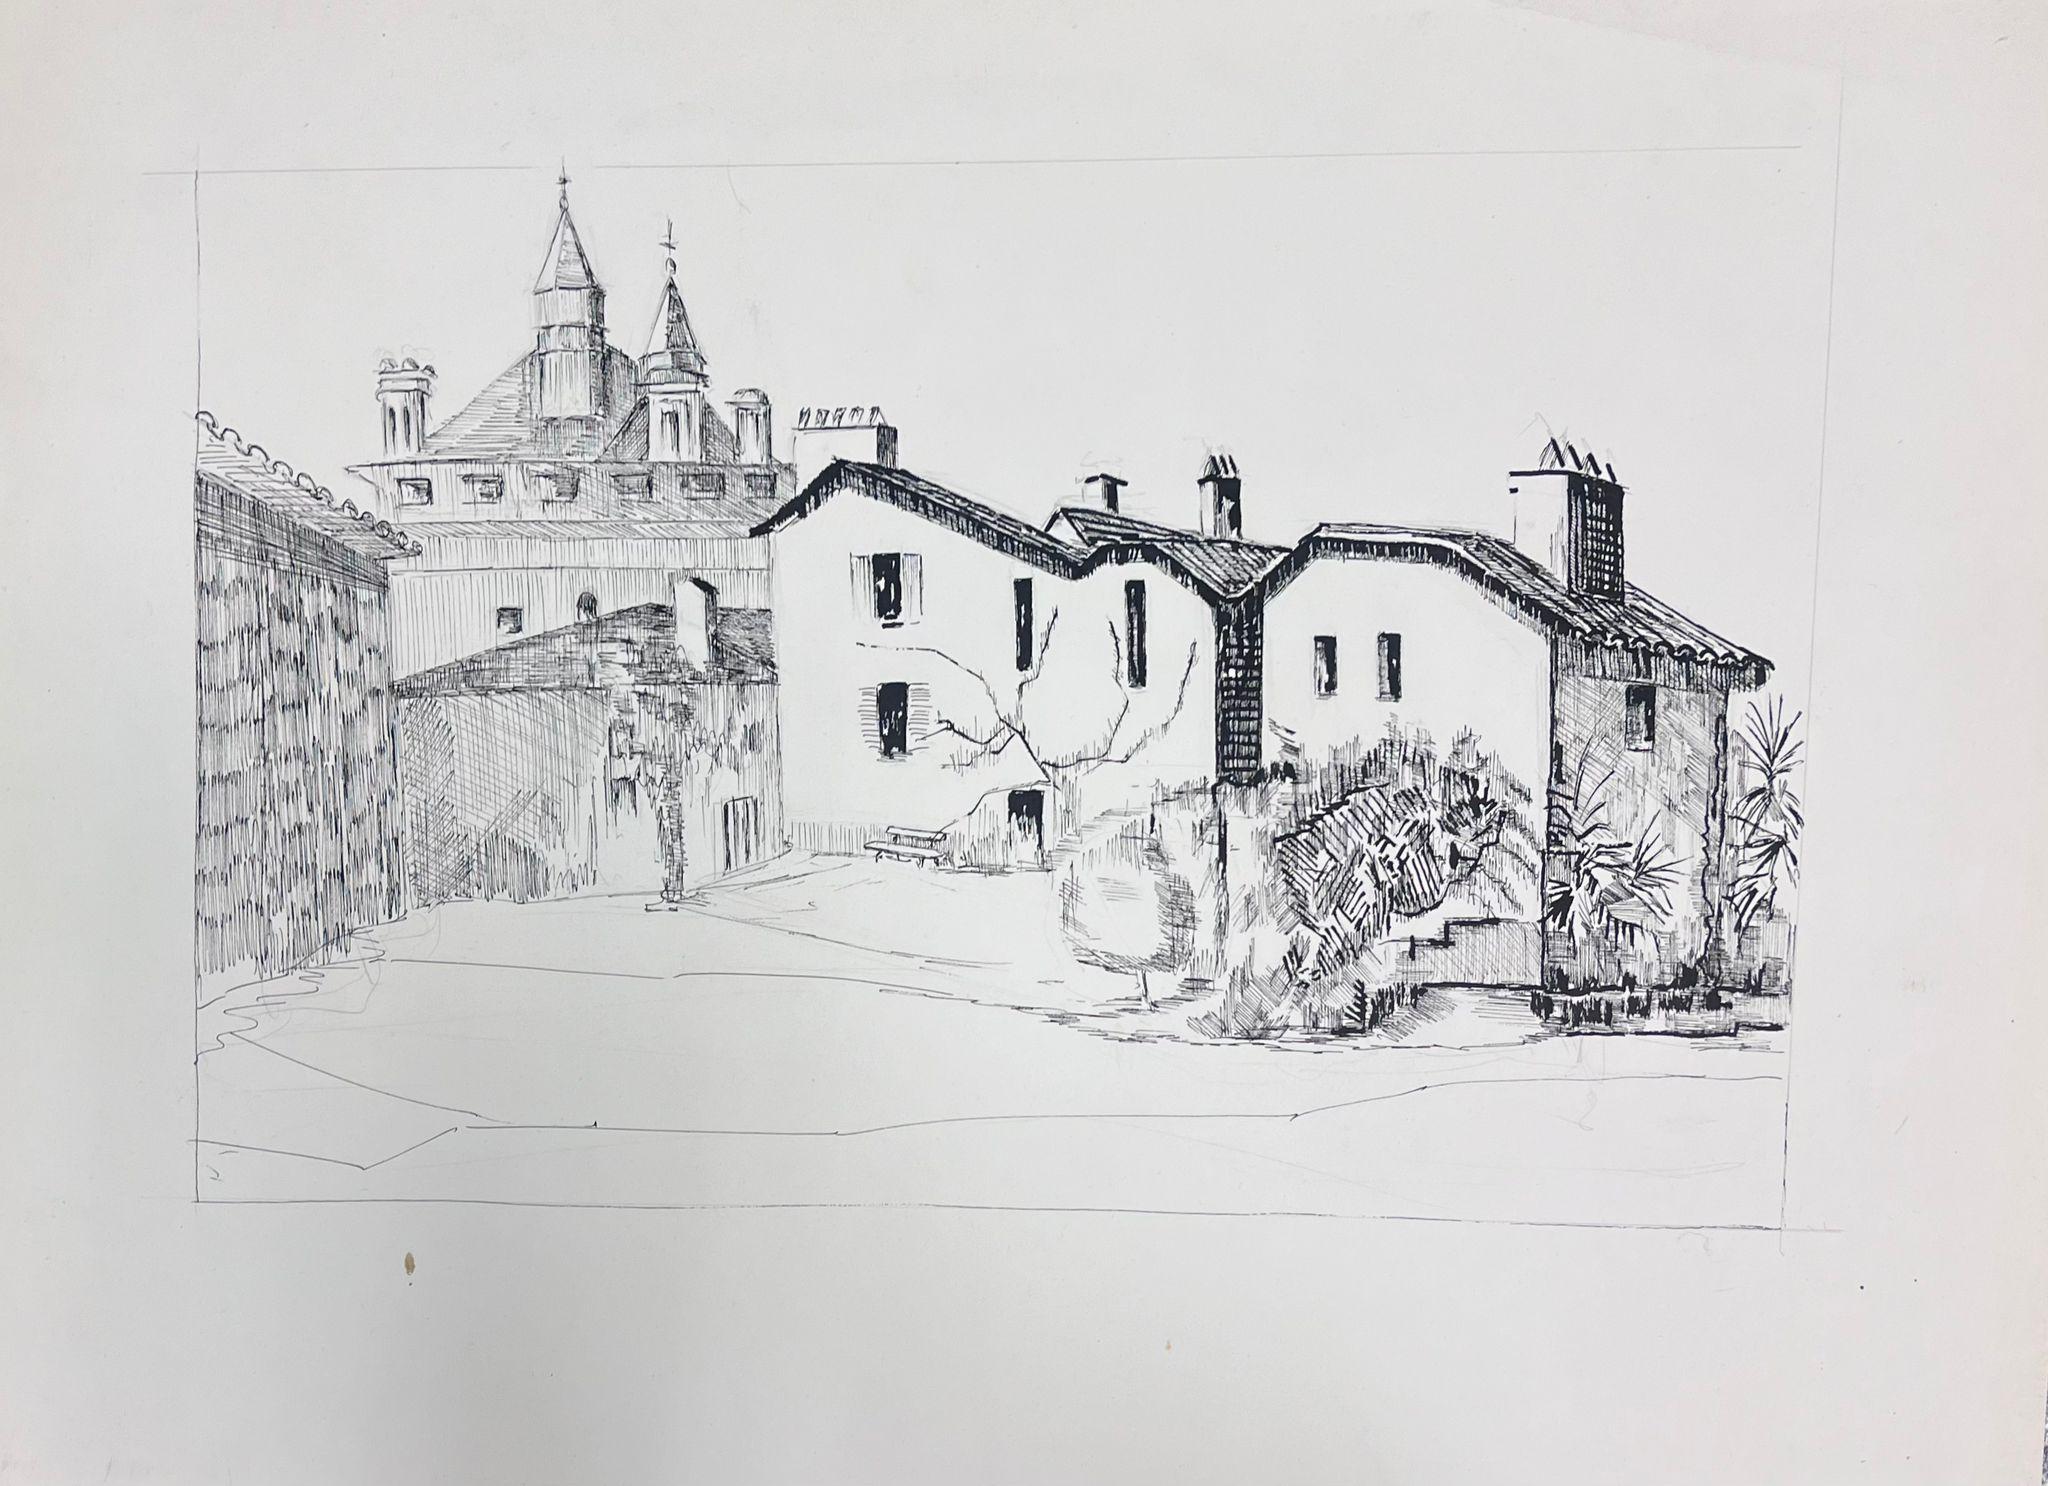 French Landscape
by Bernard Labbe (French mid 20th century)
original biro pen drawing on artist paper
size: 19 x 25 inches
condition: very good and ready to be enjoyed

provenance: the artists atelier/ studio, France (stamped verso)